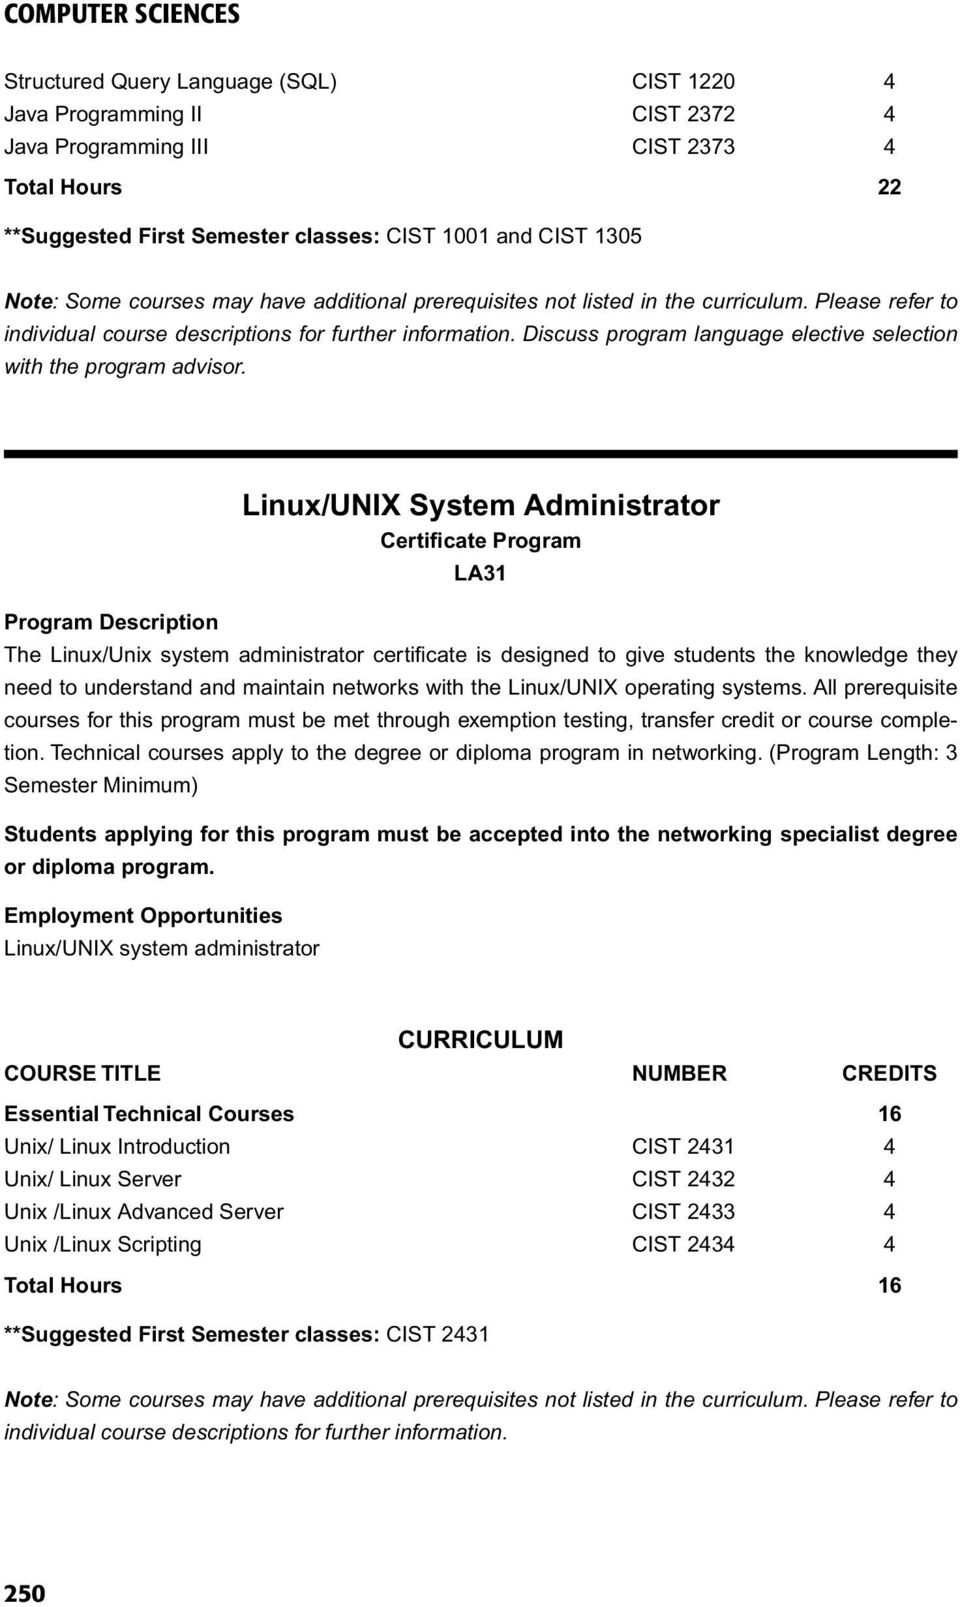 Linux/UNIX System Administrator LA31 The Linux/Unix system administrator certificate is designed to give students the knowledge they need to understand and maintain networks with the Linux/UNIX